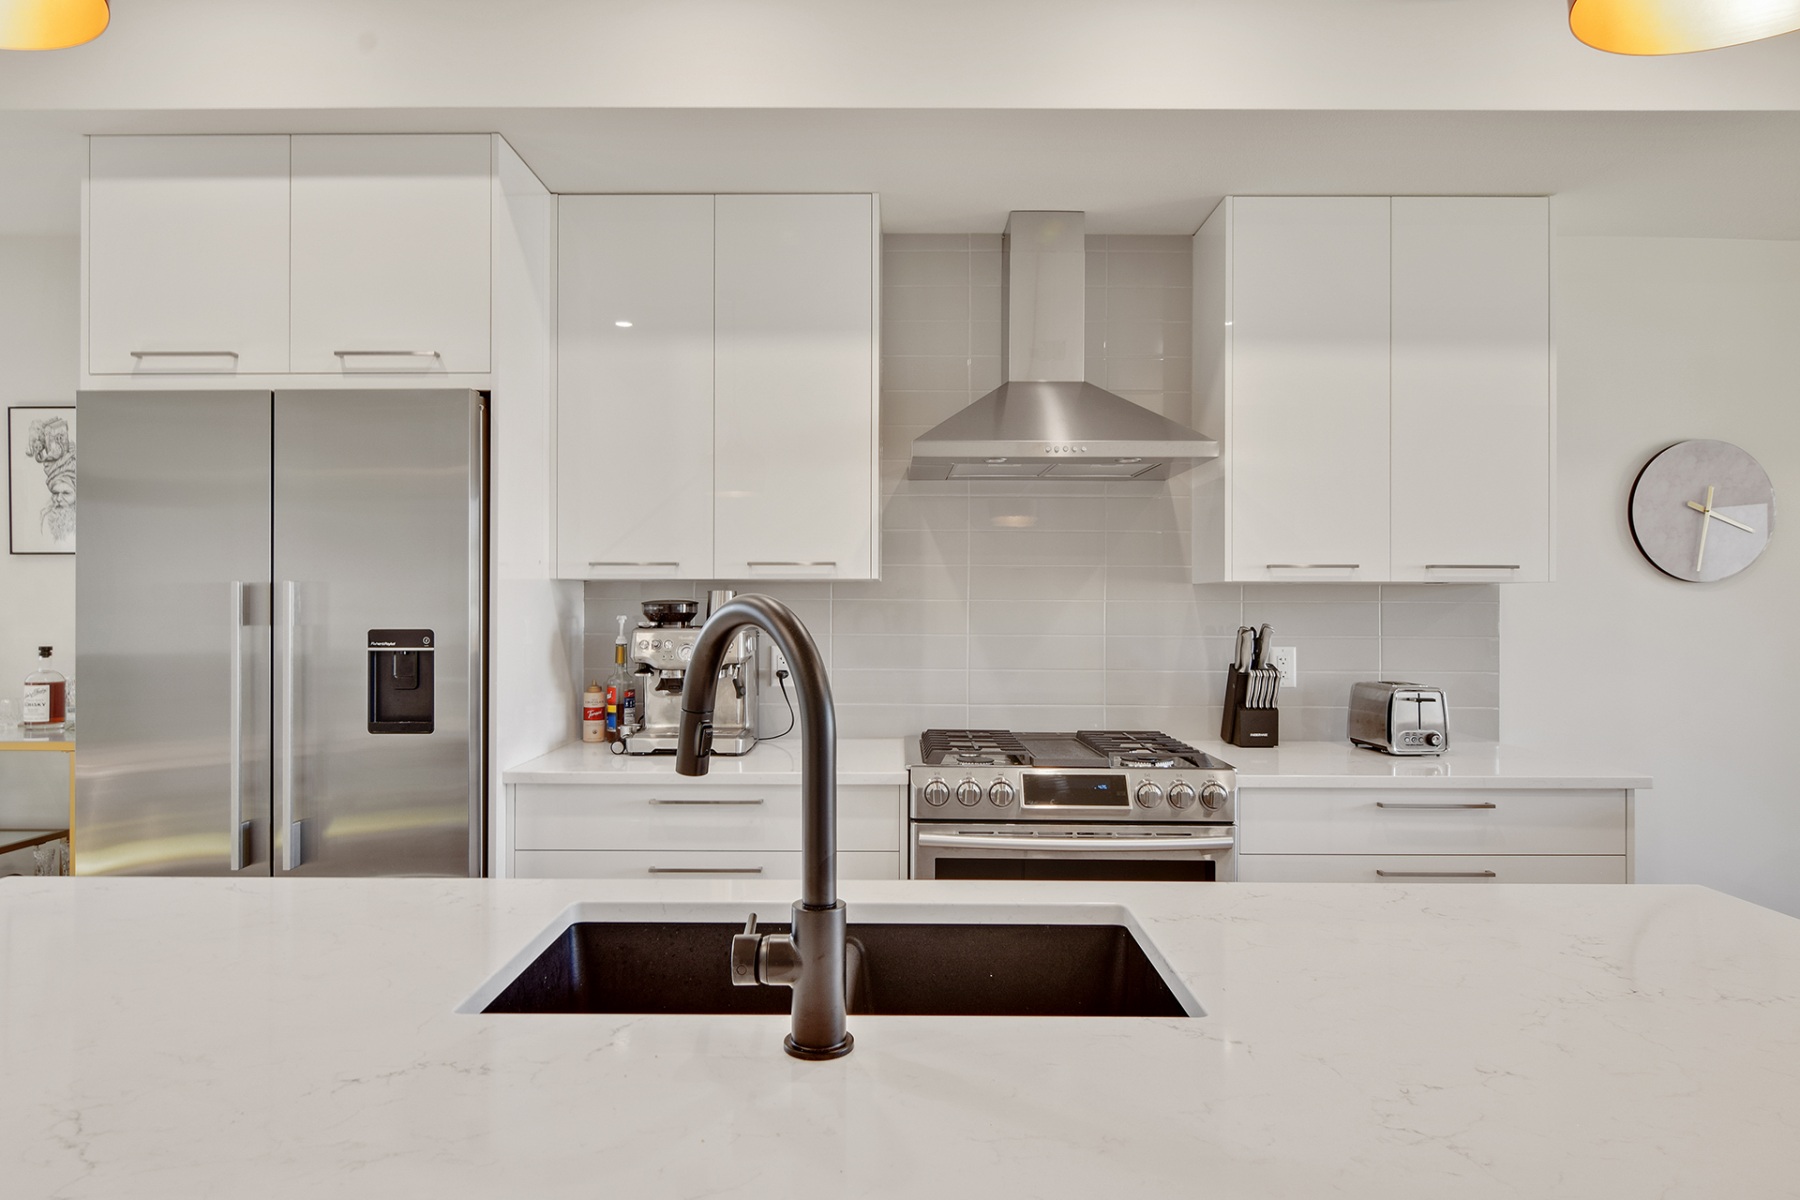 1_harmony_homes_raymer_infill_project_1_kitchen_view_gallery_image_9